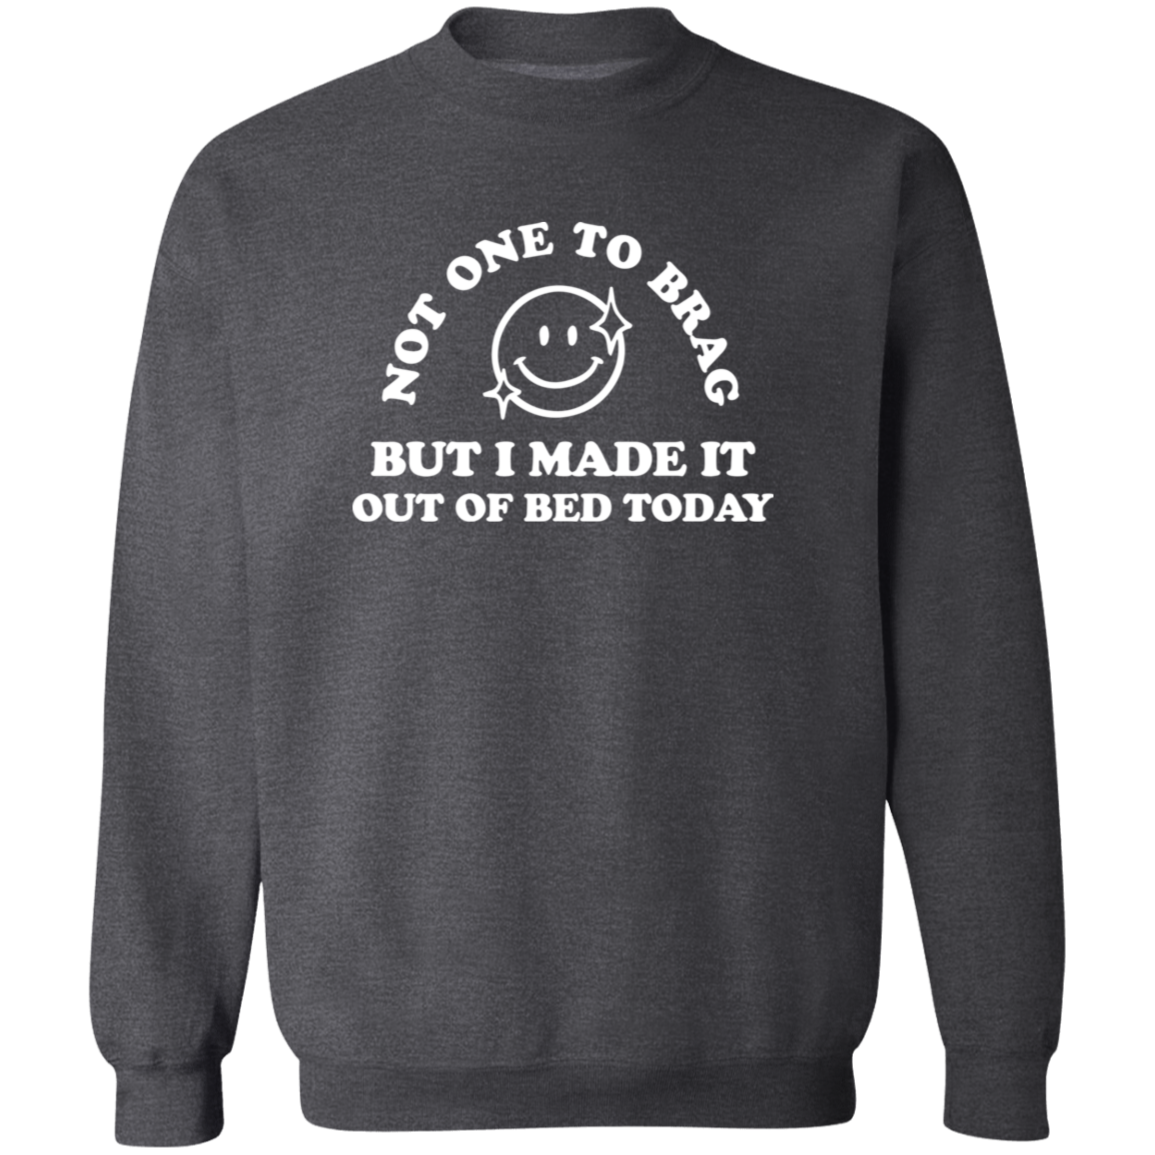 Made It Out Of Bed Today Sweatshirt